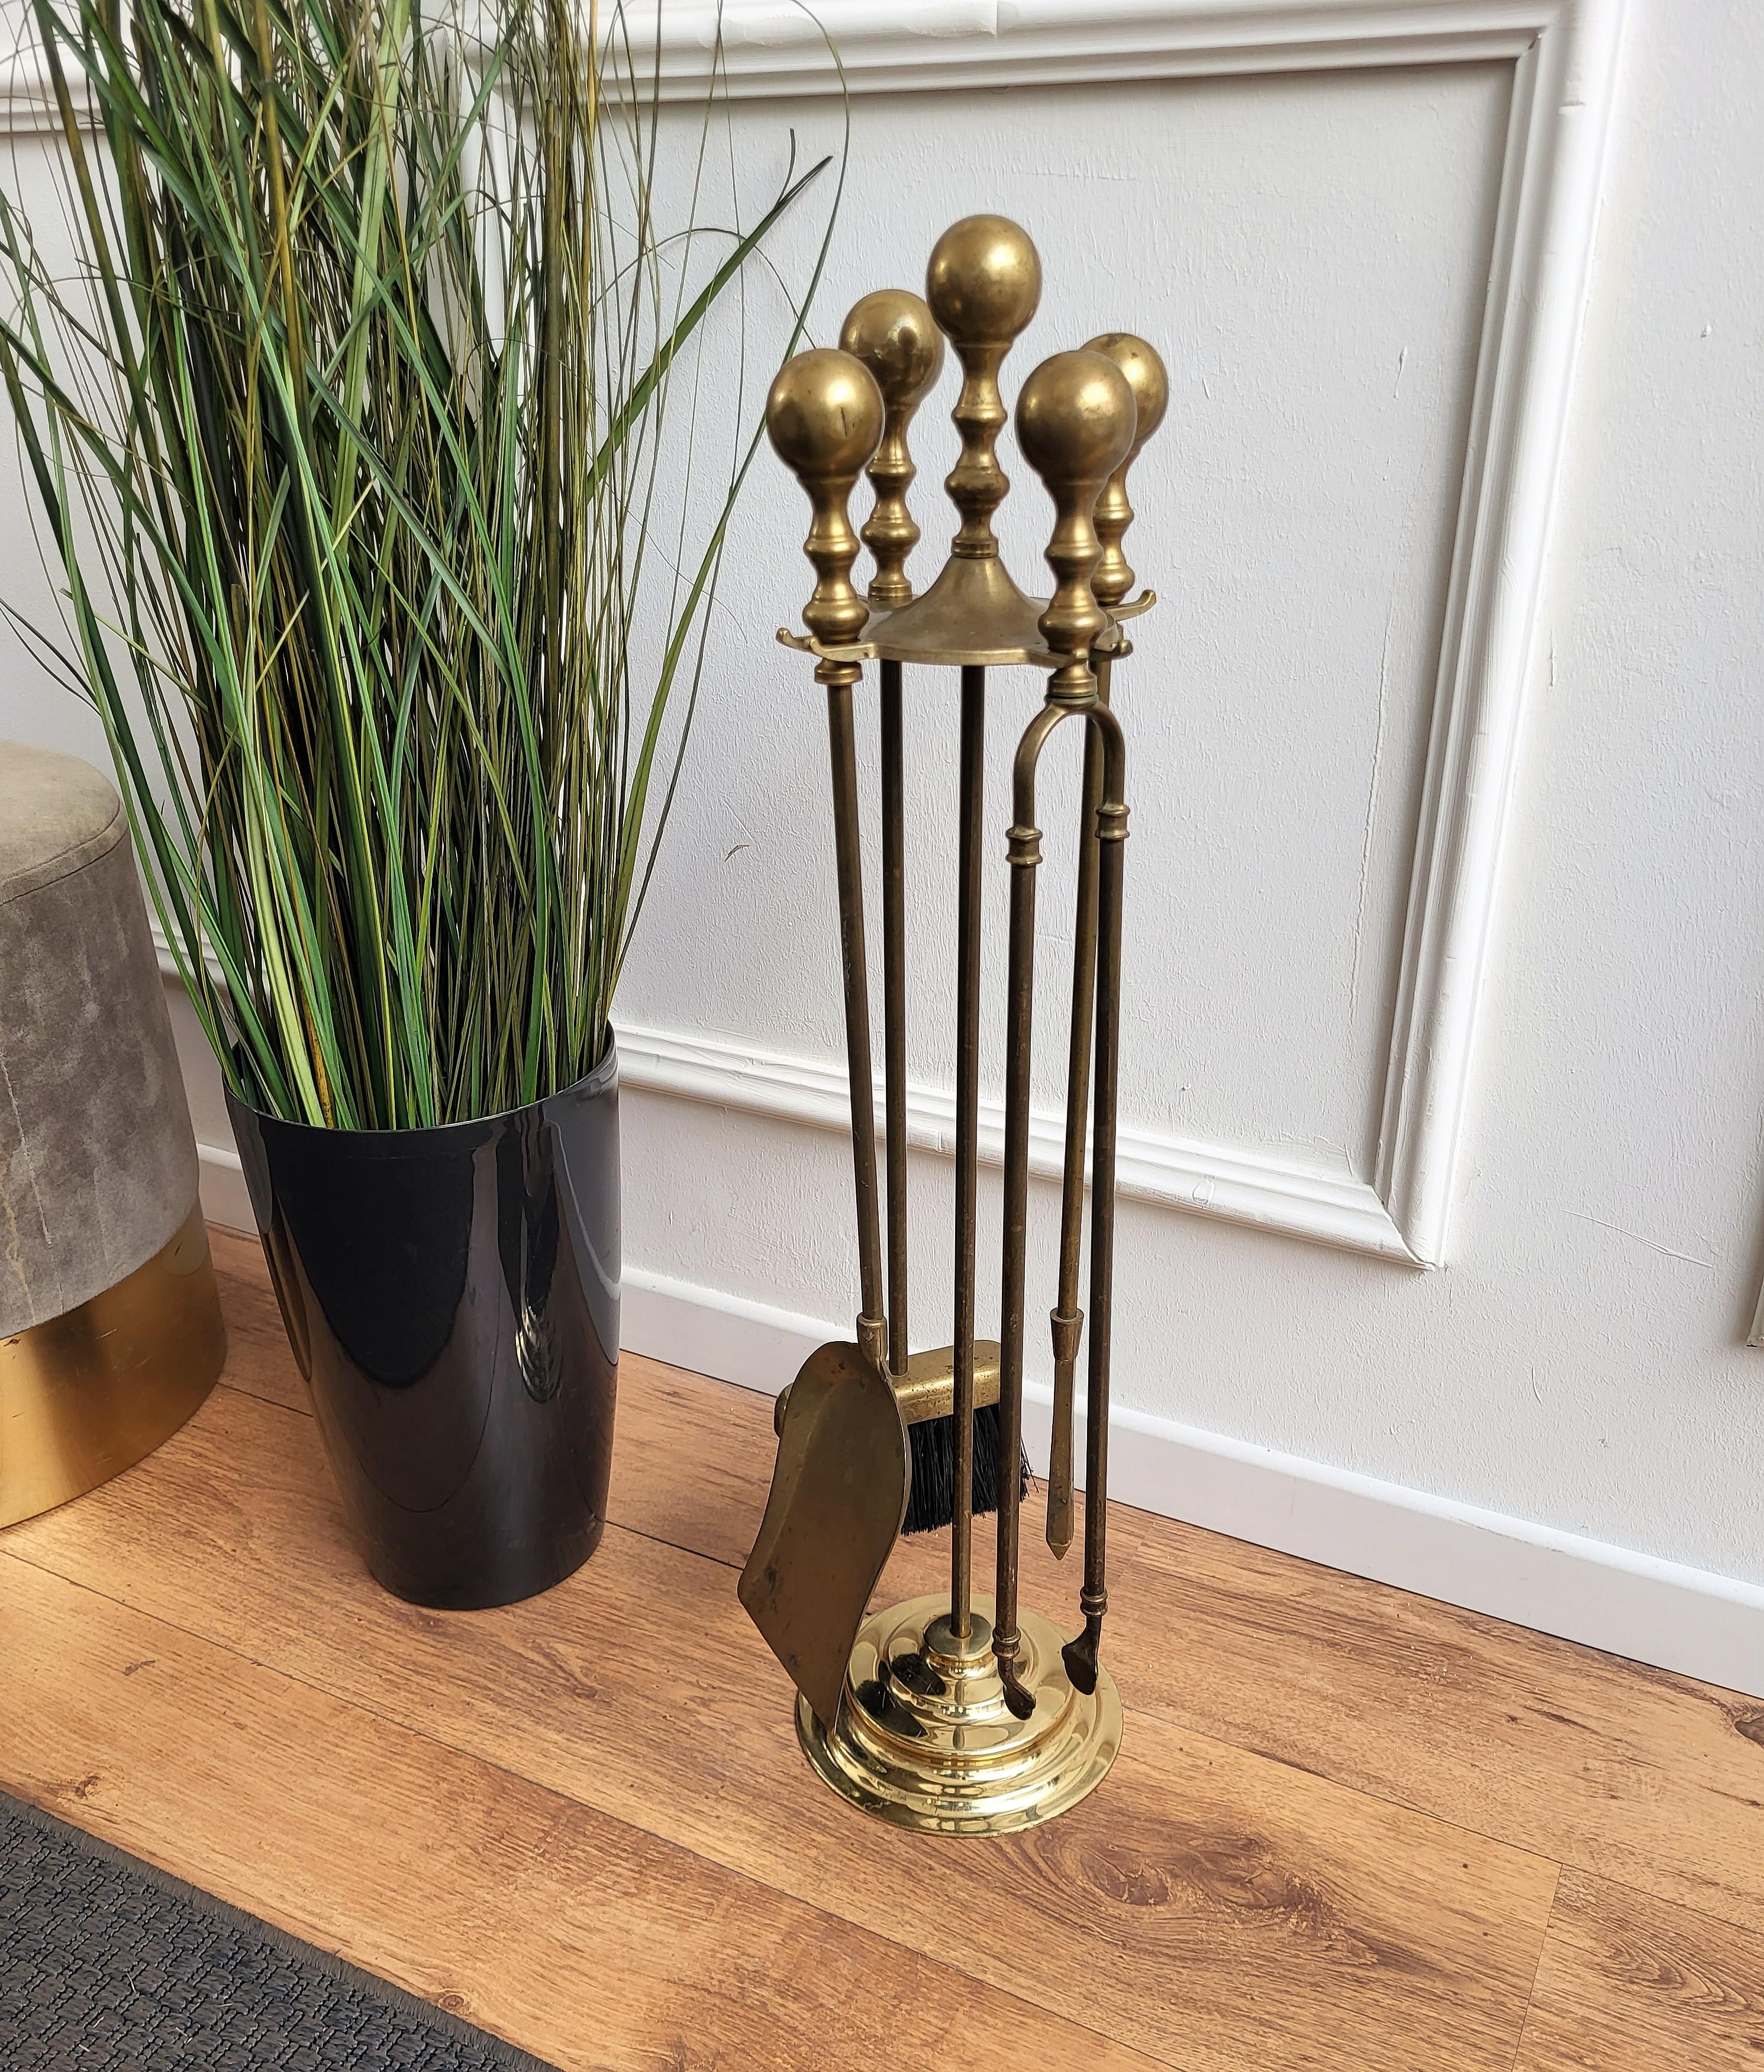 Italian brass four-piece fire tool set with stand. The set consists of a poker, a shovel and a pair of tongs, each with an ornate handle such as the stand. 

